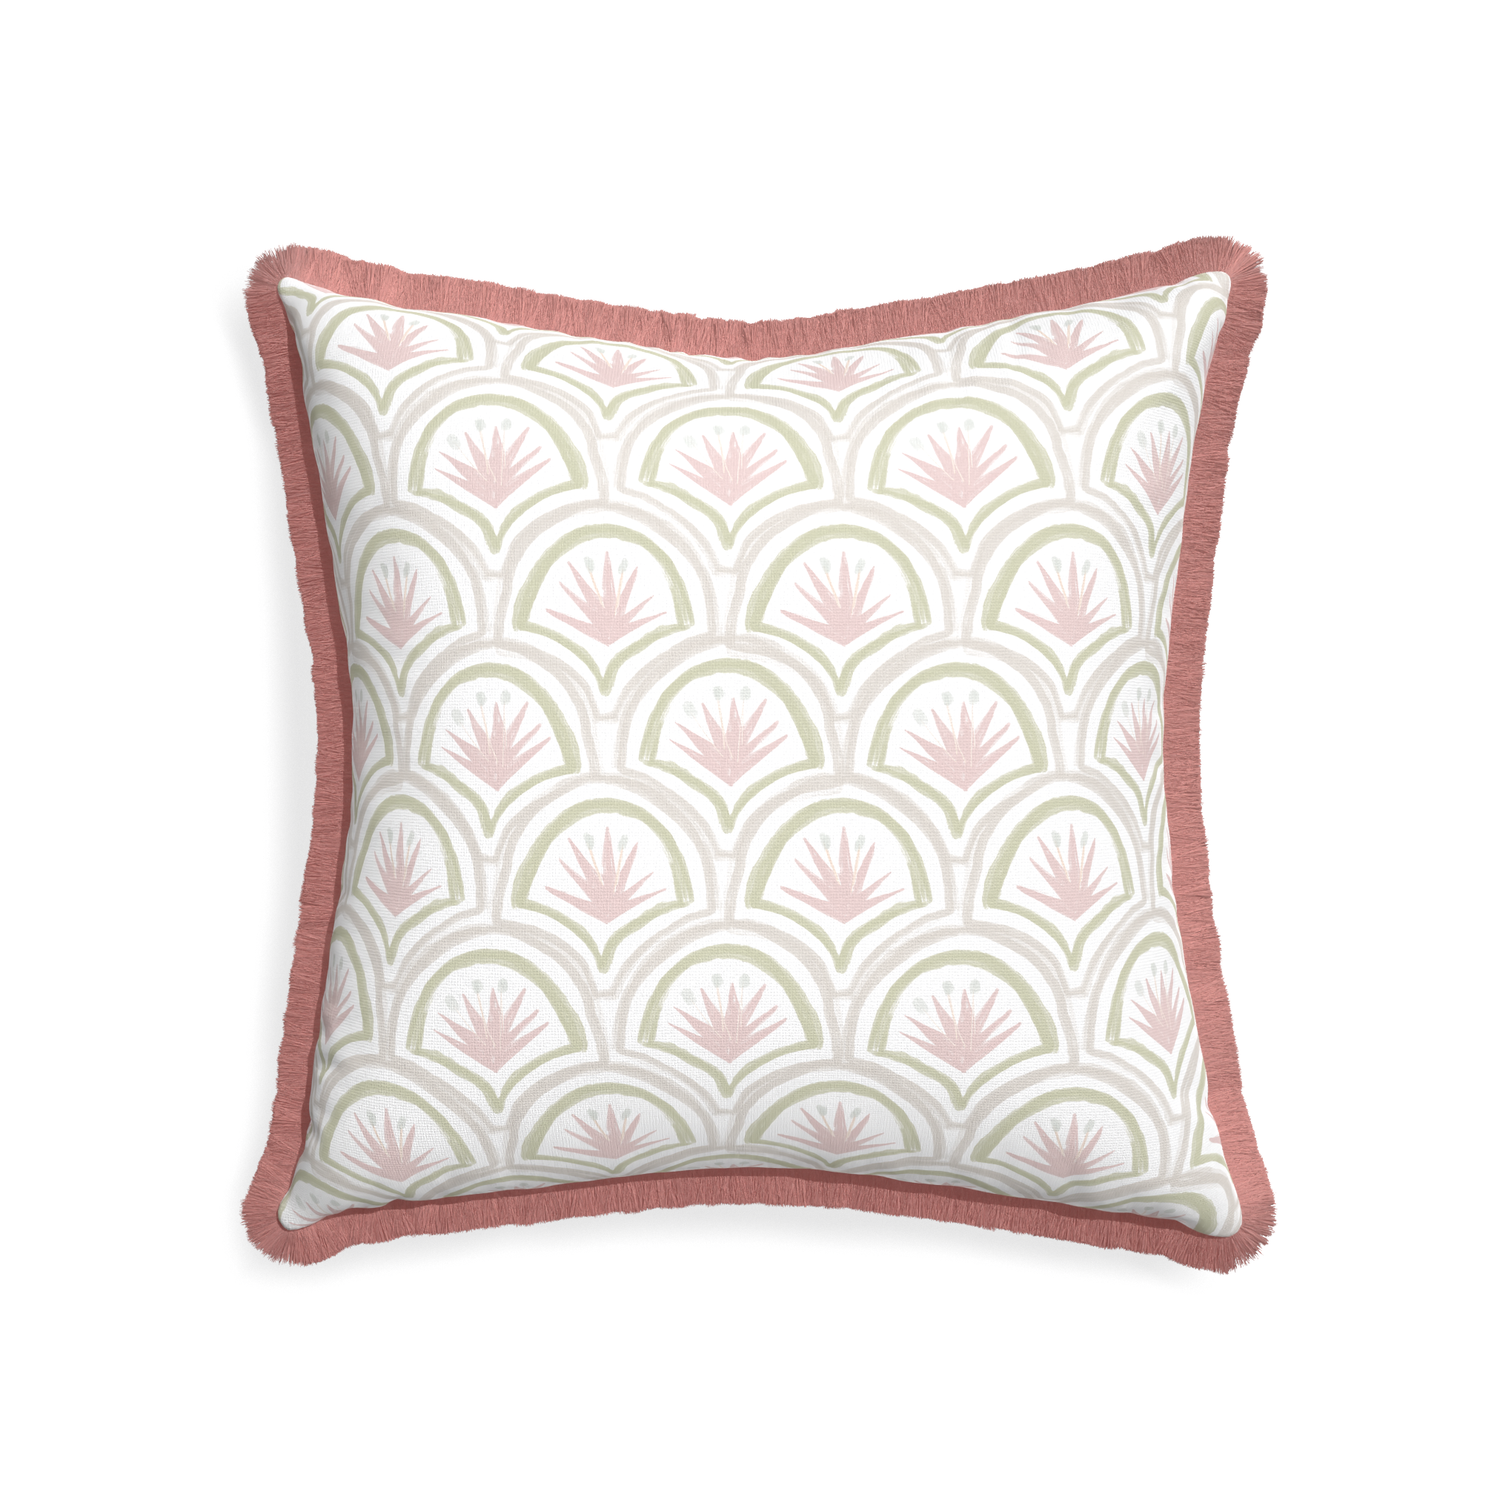 22-square thatcher rose custom pillow with d fringe on white background